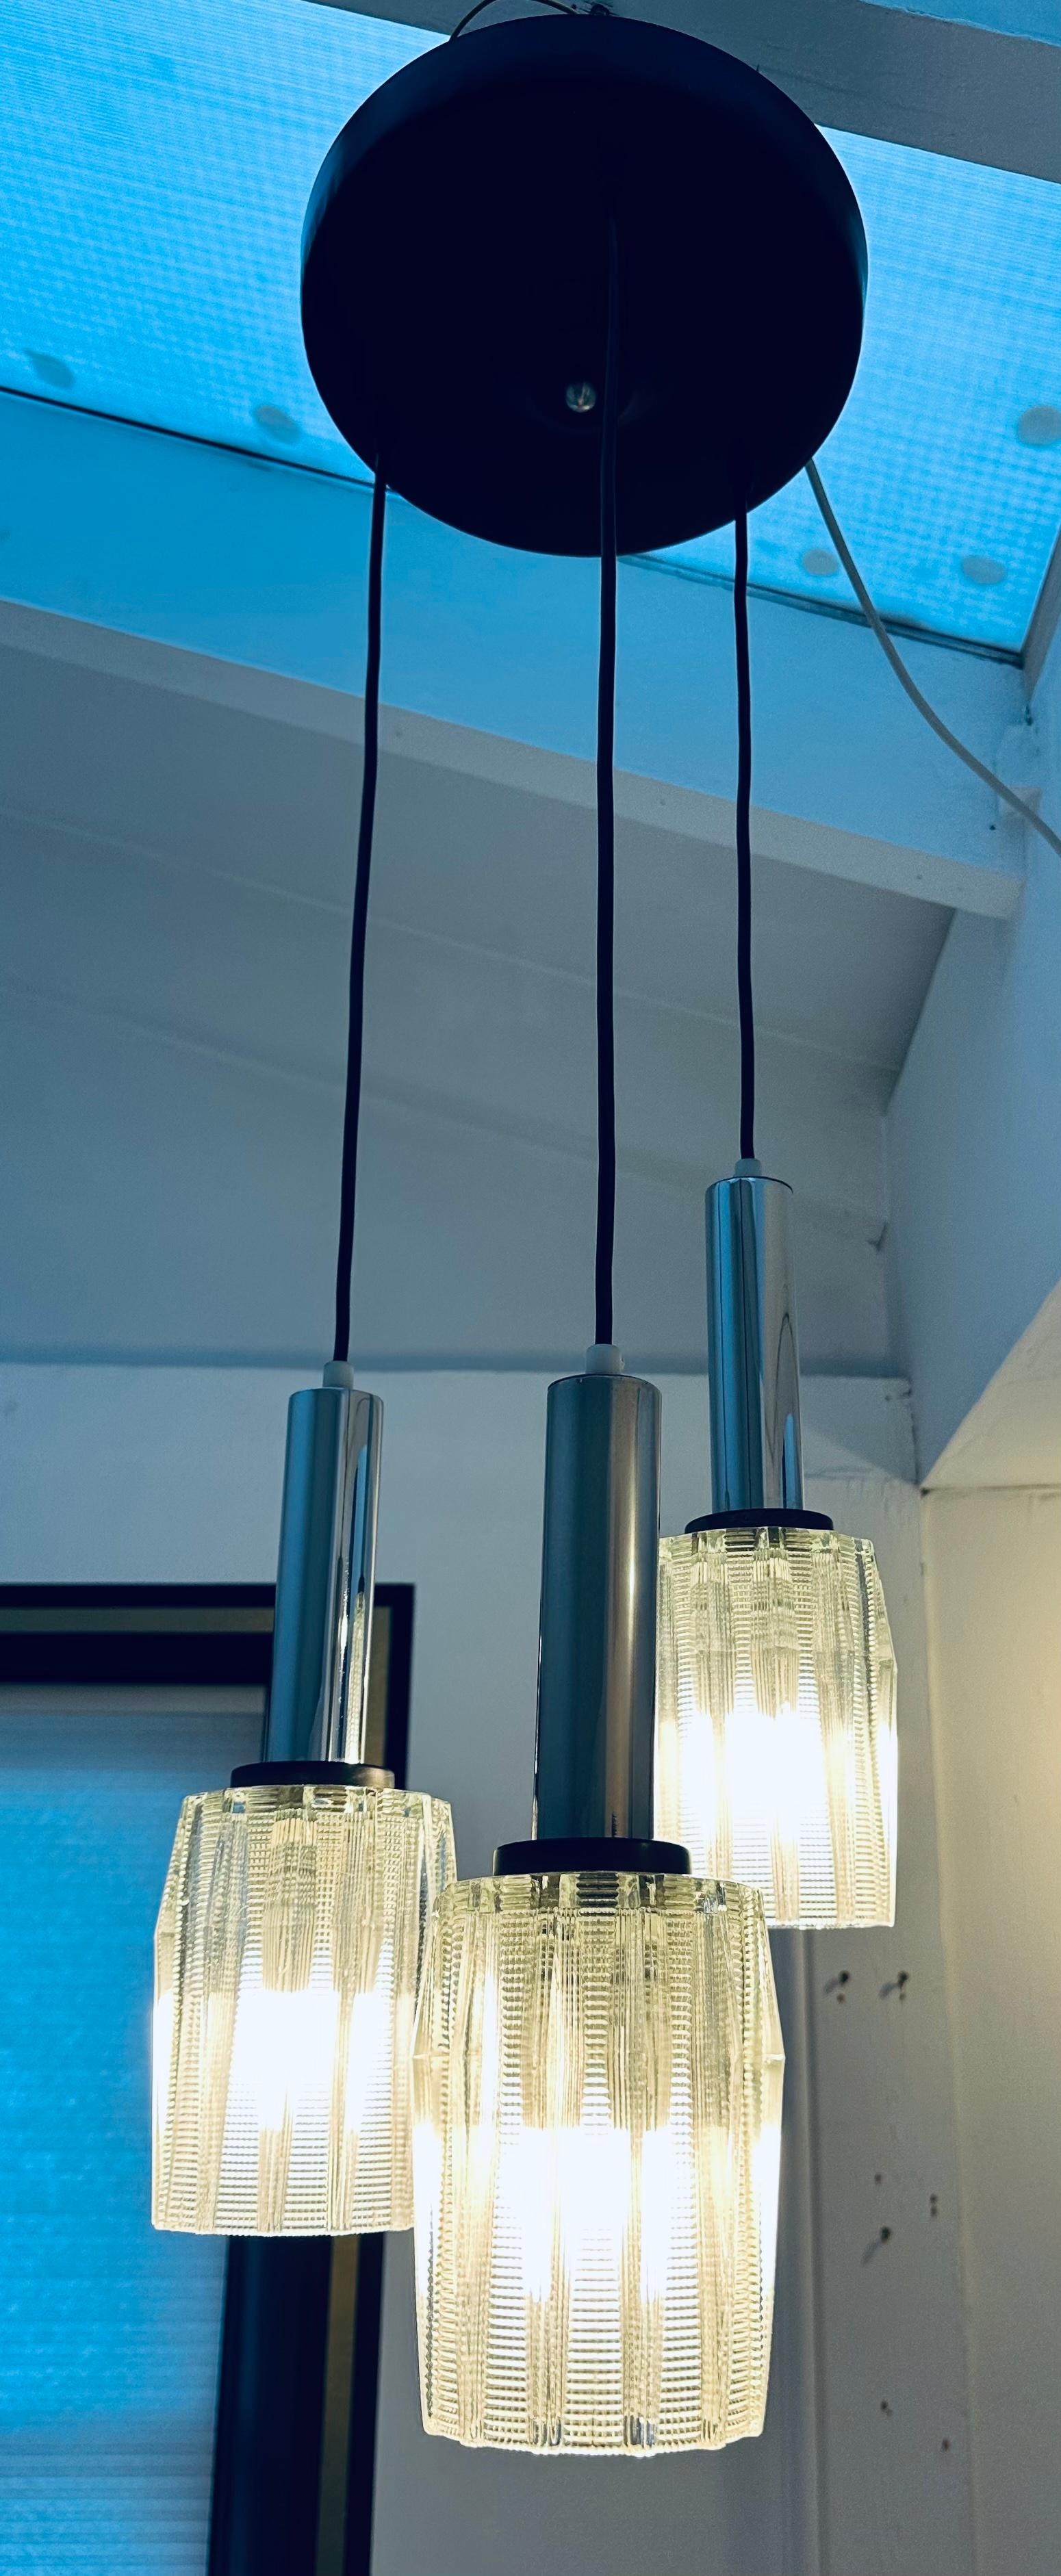 1960s Danish mid century triple glass shade hanging ceiling light.  The glass shades diffuse the light beautifully through the serrated glass design which is overlaid and interspersed with clear glass vertical fins.  The glass shades are suspended